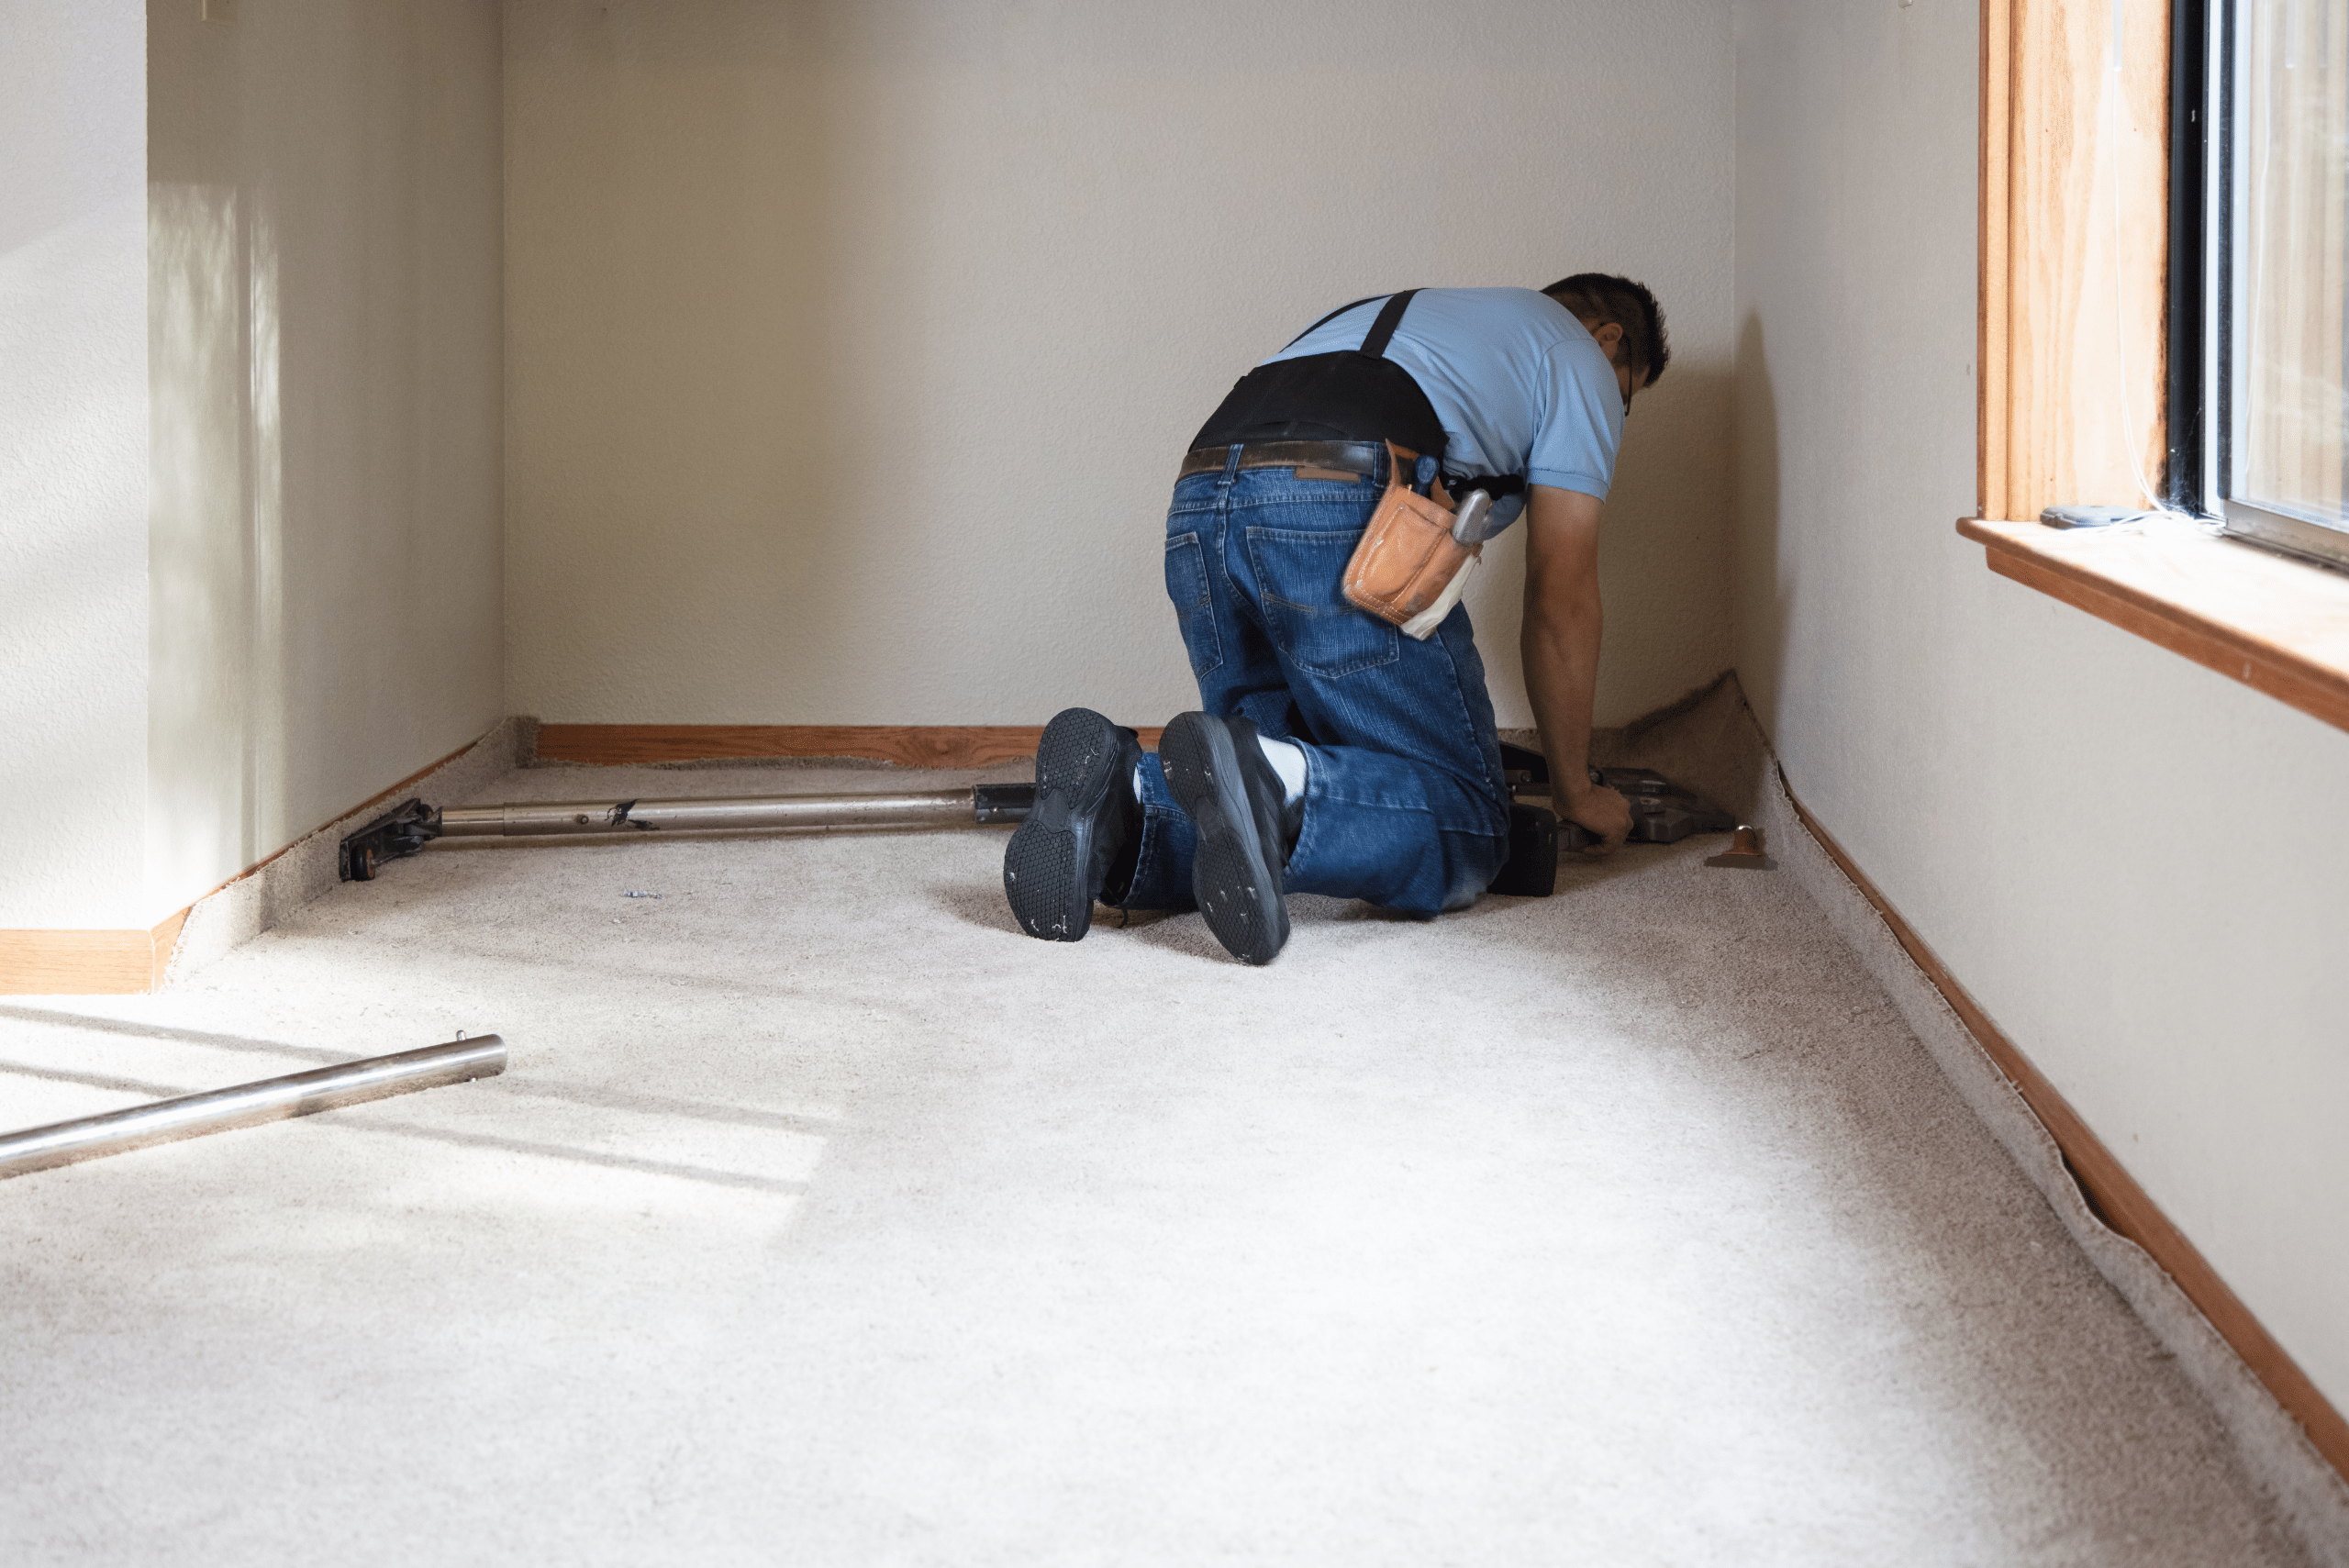 Worker using a carpet stretcher to get the carpet installed flush.